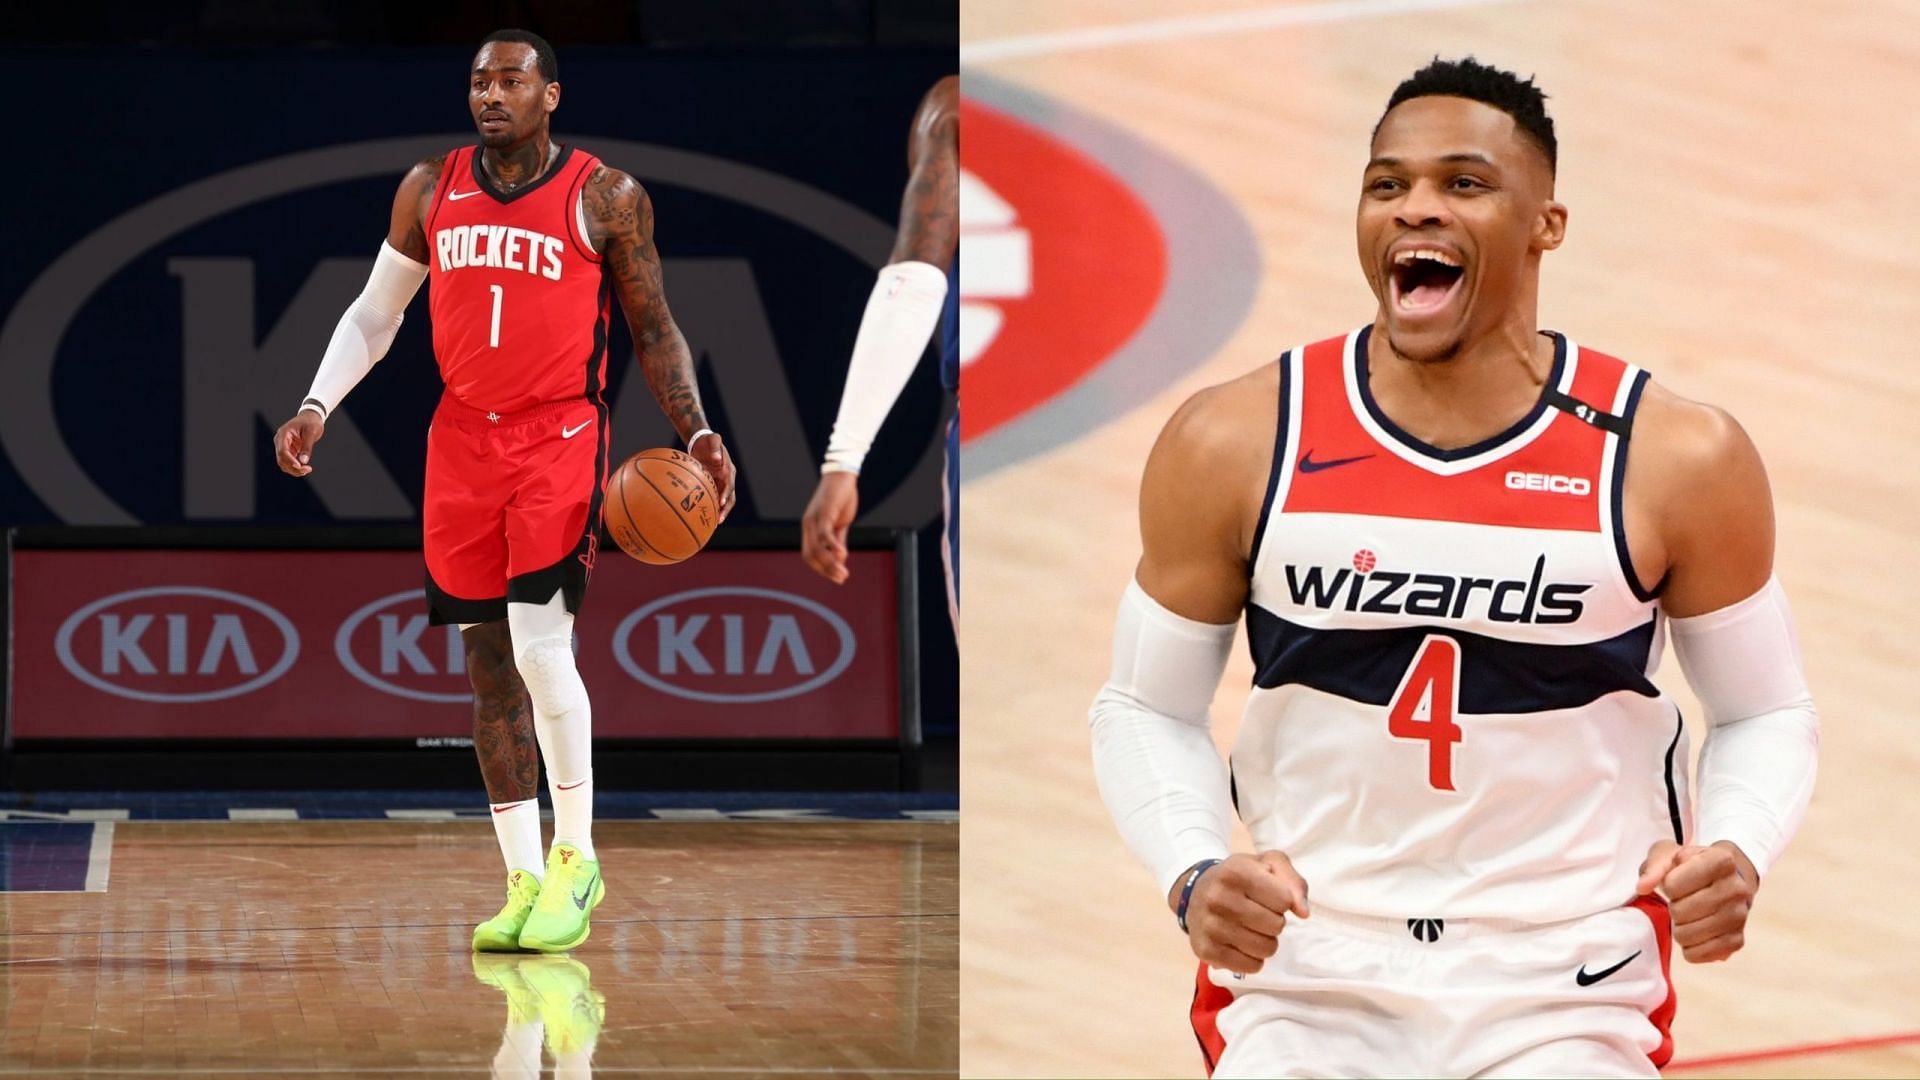 John Wall reveals Russell Westbrook reached out to him about the trade